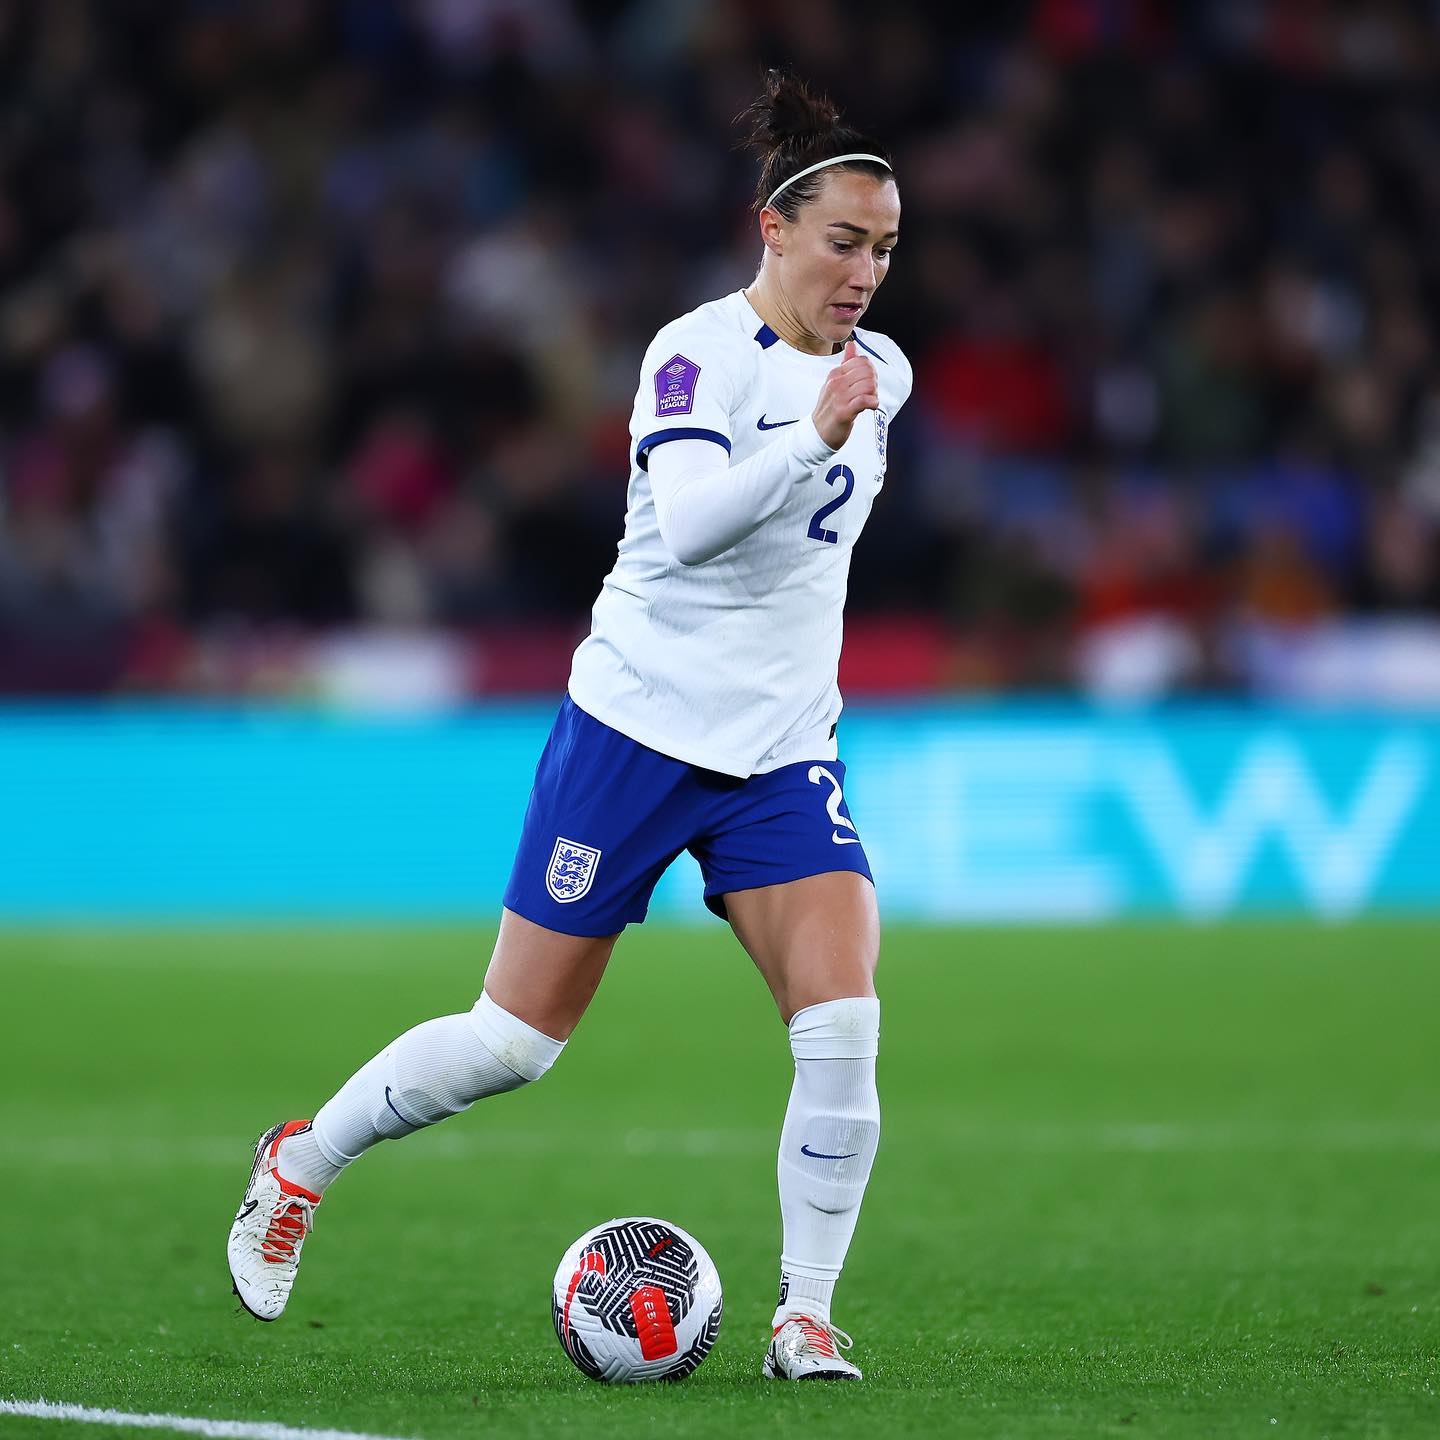 Lucy Bronze hot female soccer player